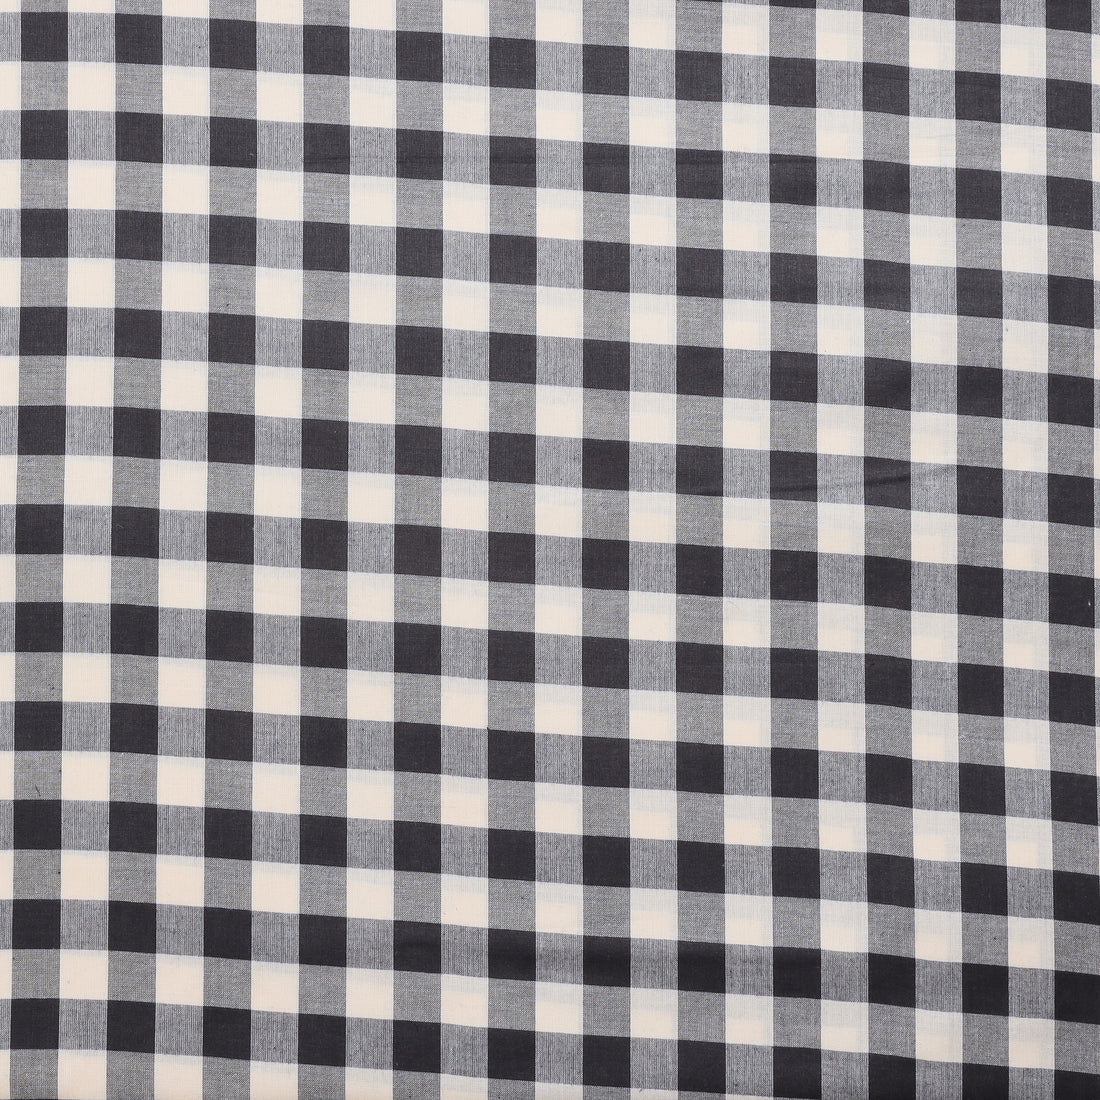 Moda - Cotton - Low Volume Woven - Large Check - Charcoal